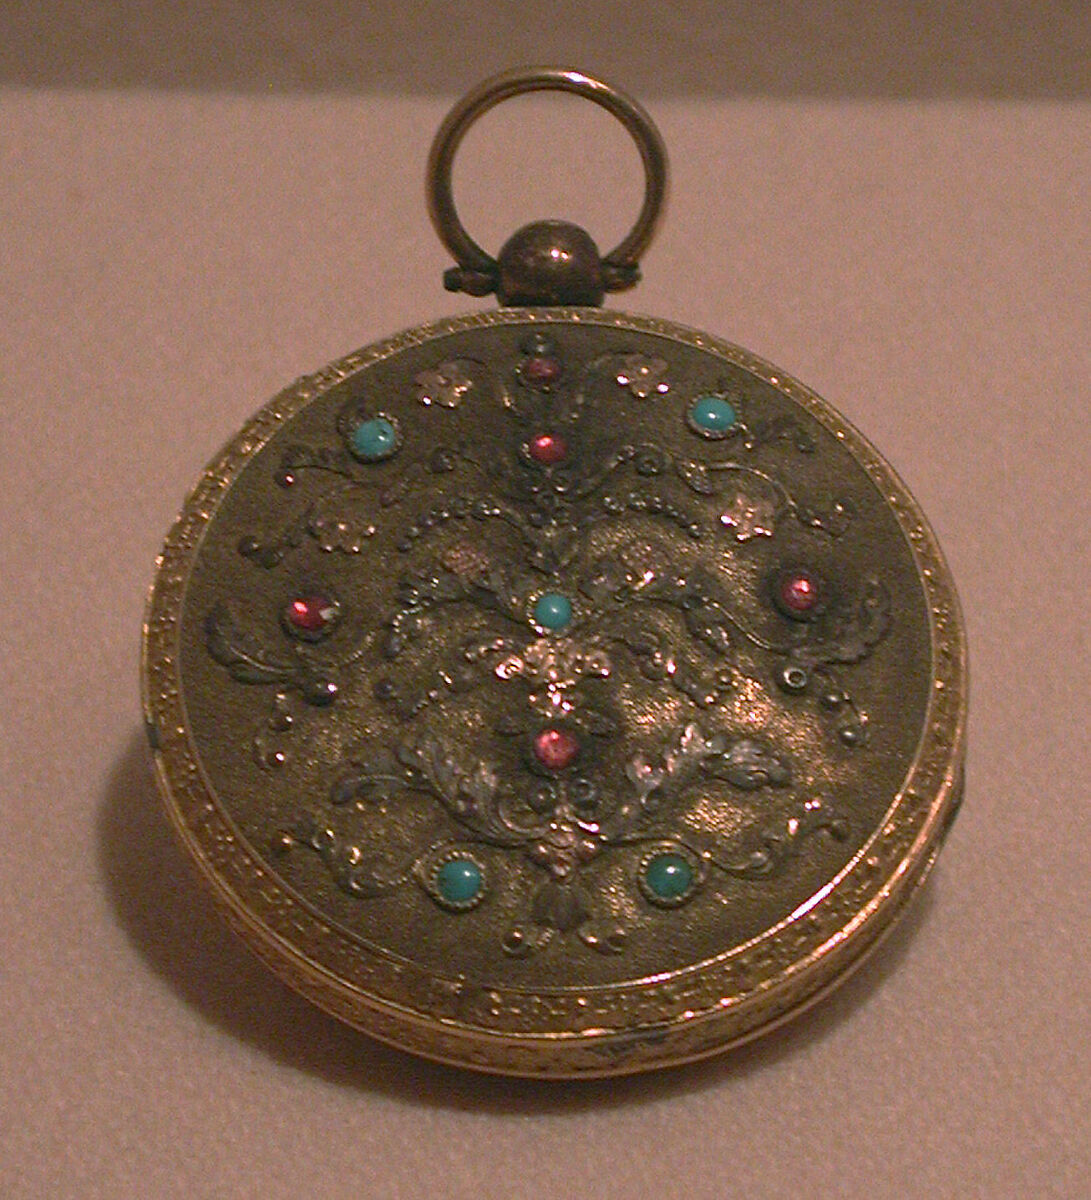 Watch, Watchmaker: Firm of Esquivillon Frères (recorded ca. 1800), Gold, jewels (turquoises and garnets?), enamel, steel, Swiss, Geneva 